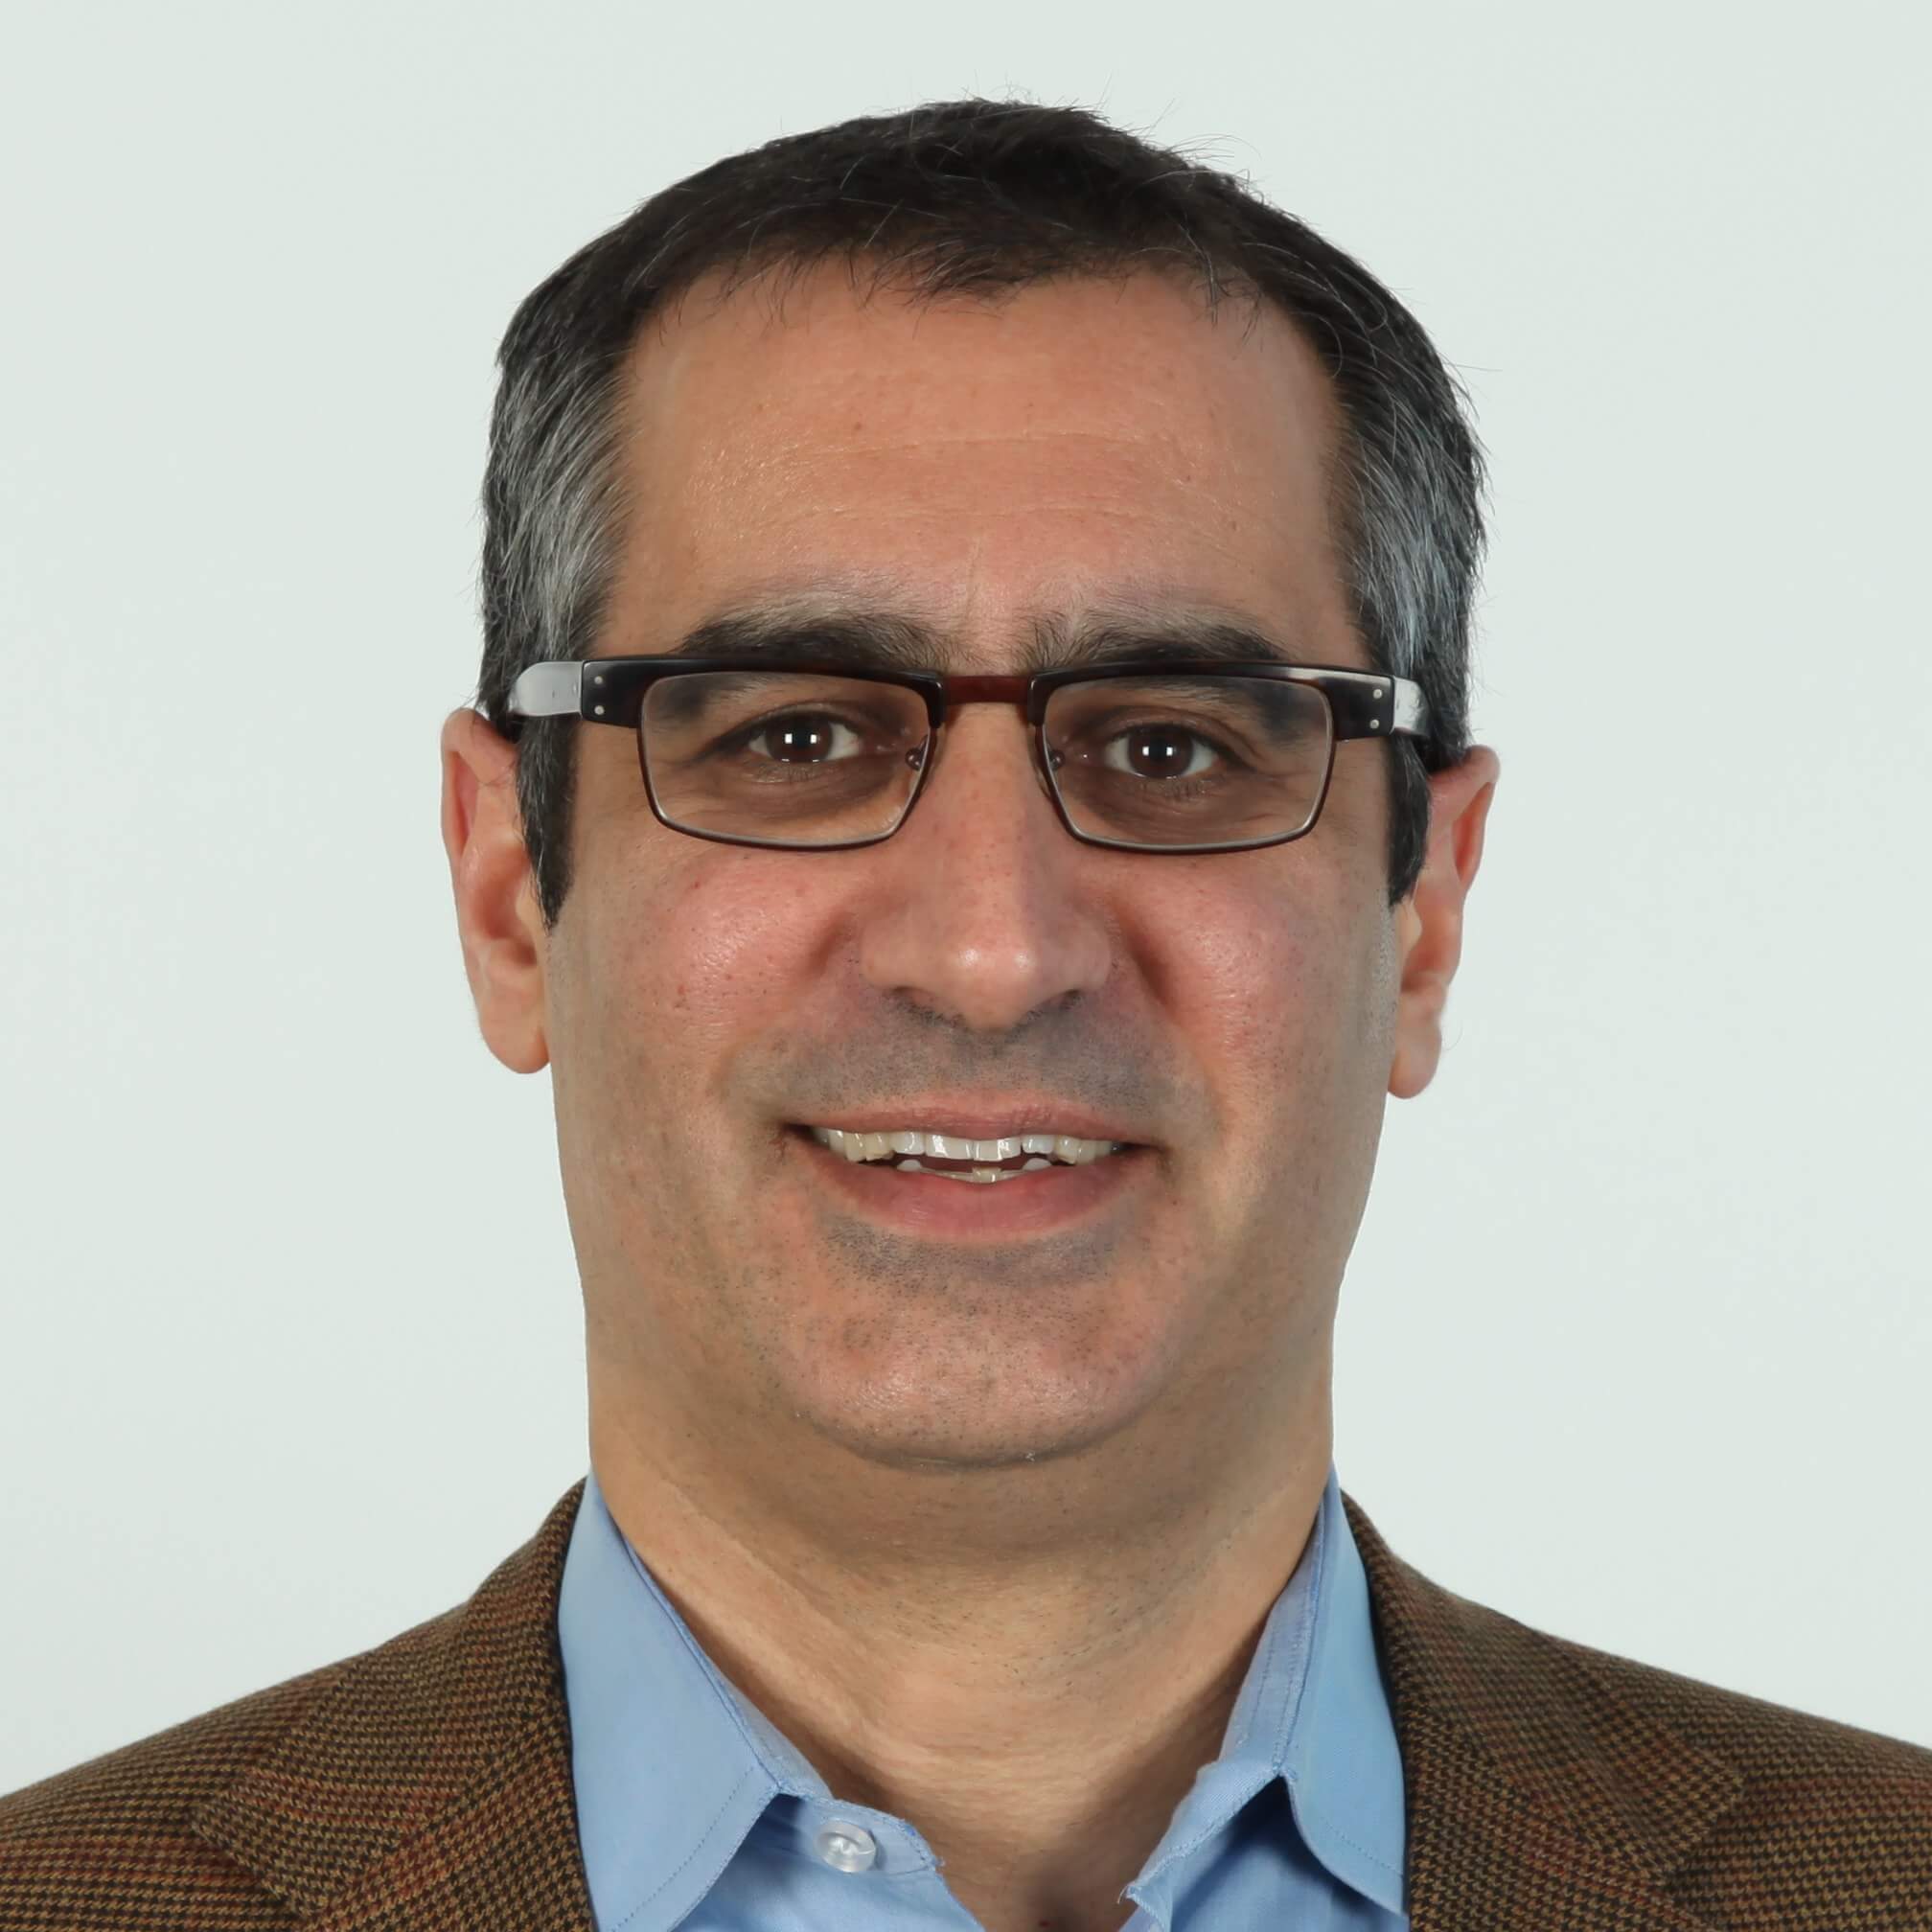 A man in glasses is smiling for the camera.